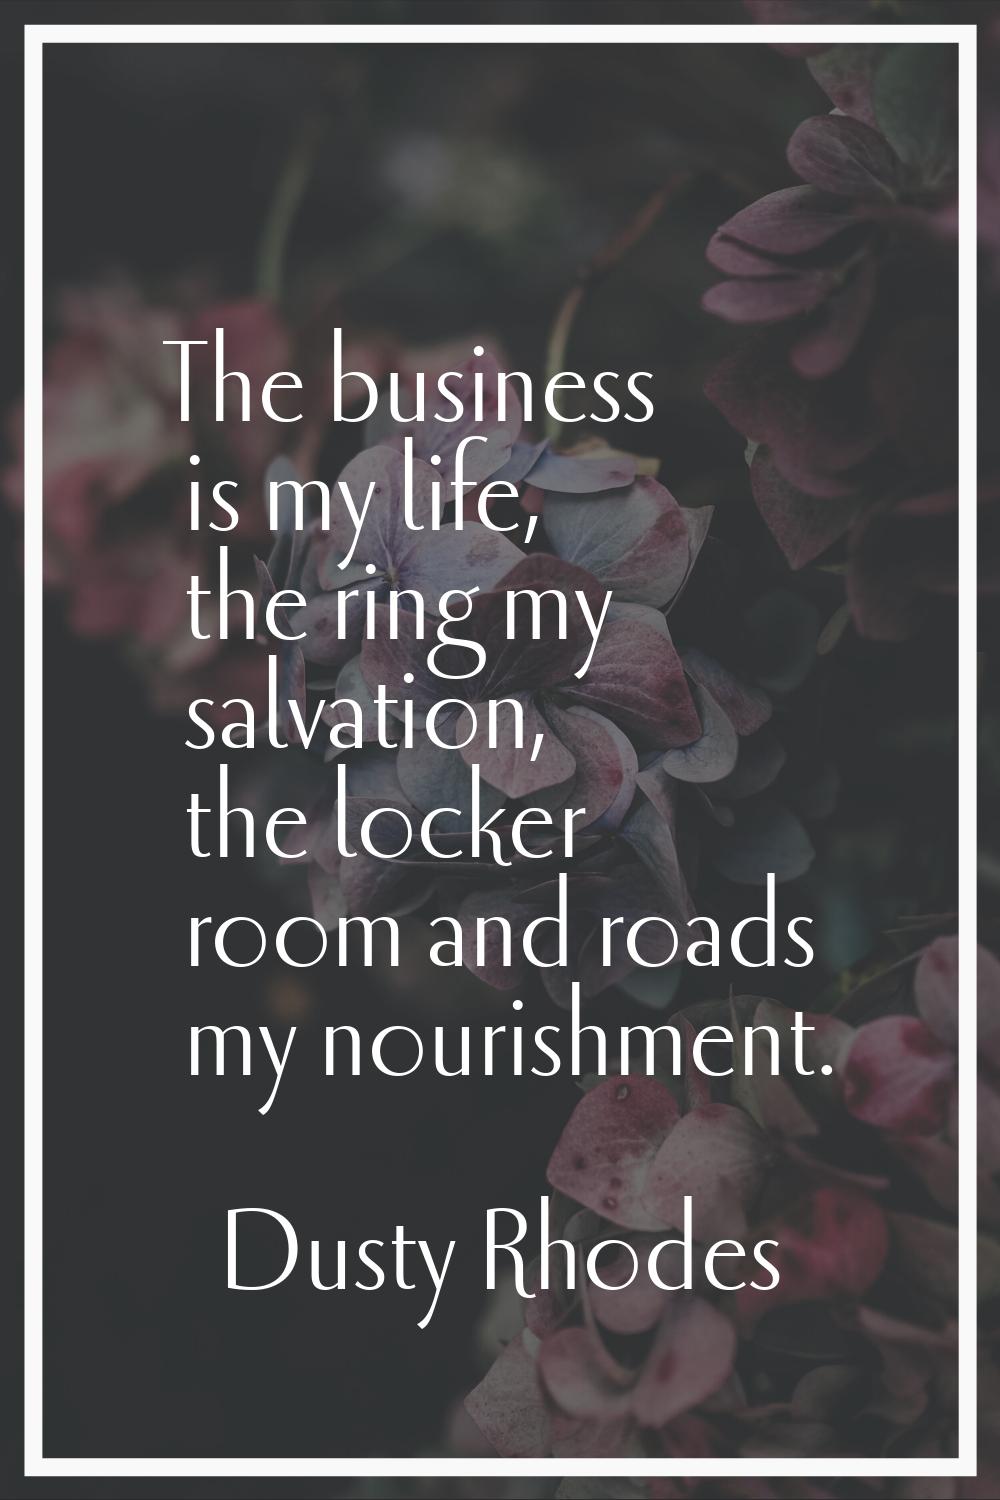 The business is my life, the ring my salvation, the locker room and roads my nourishment.